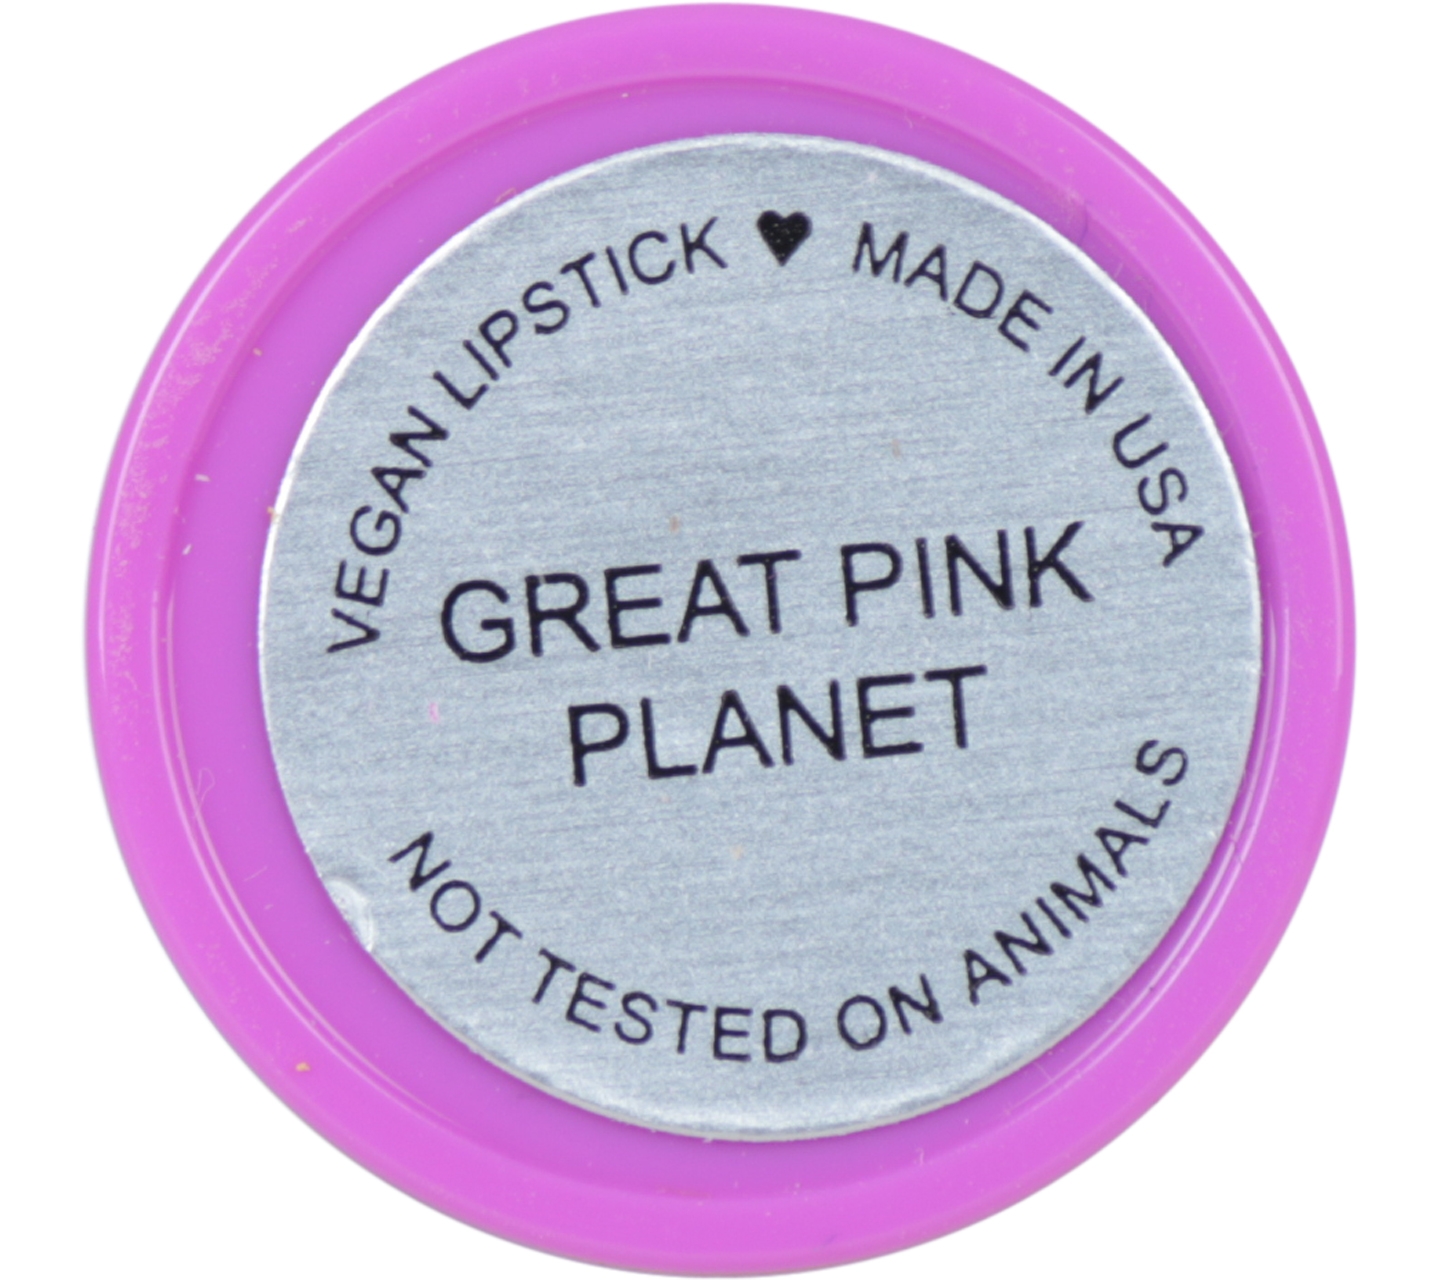 Lime Crime Pink 6th Anniversary Great Pink Planet Unicorn Lips